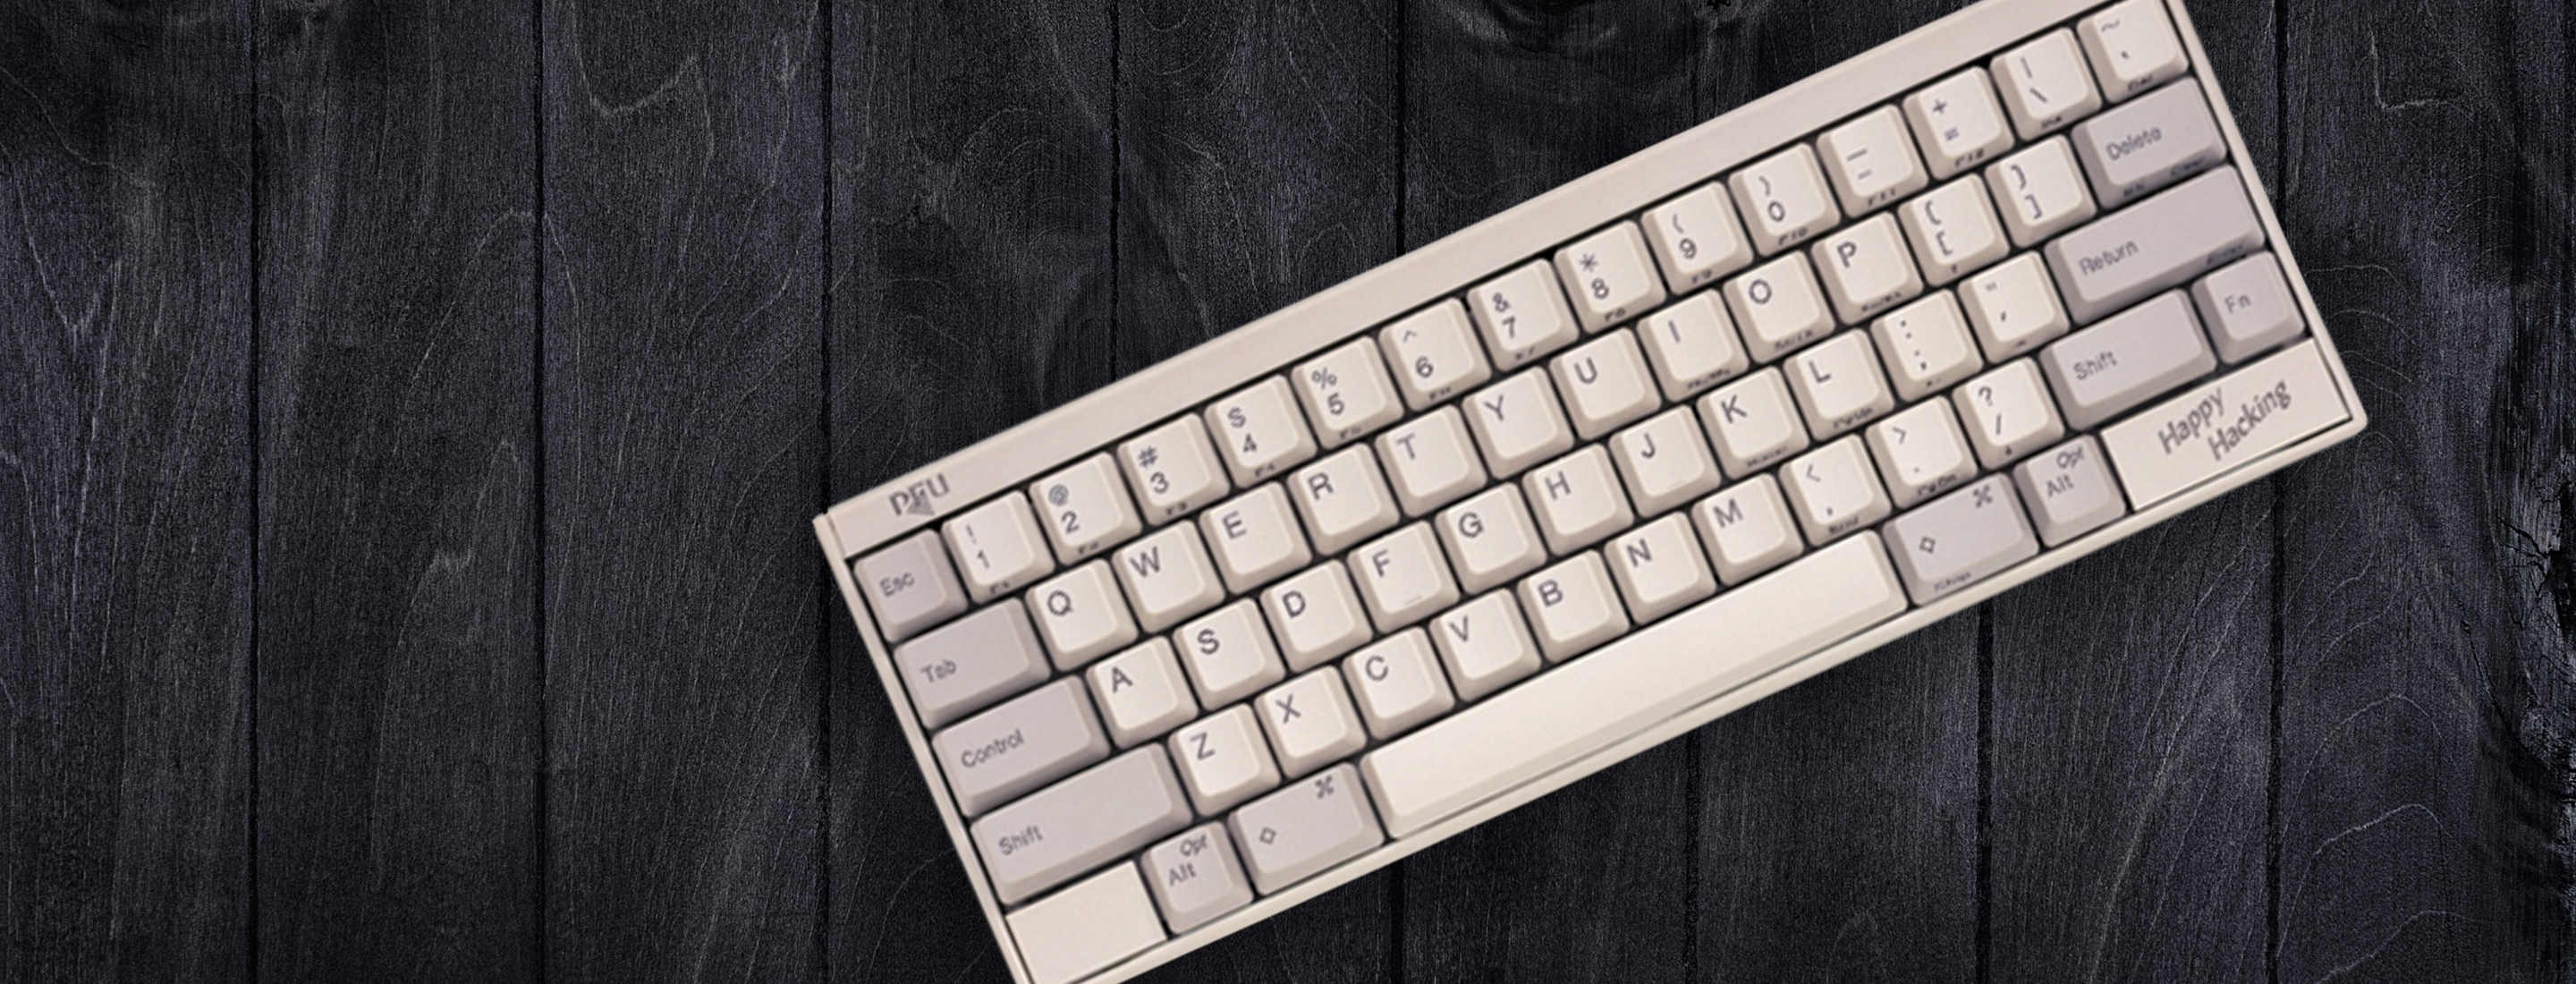 HHKB Professional Classic - Happy Hacking Keyboard Pro Classic For 